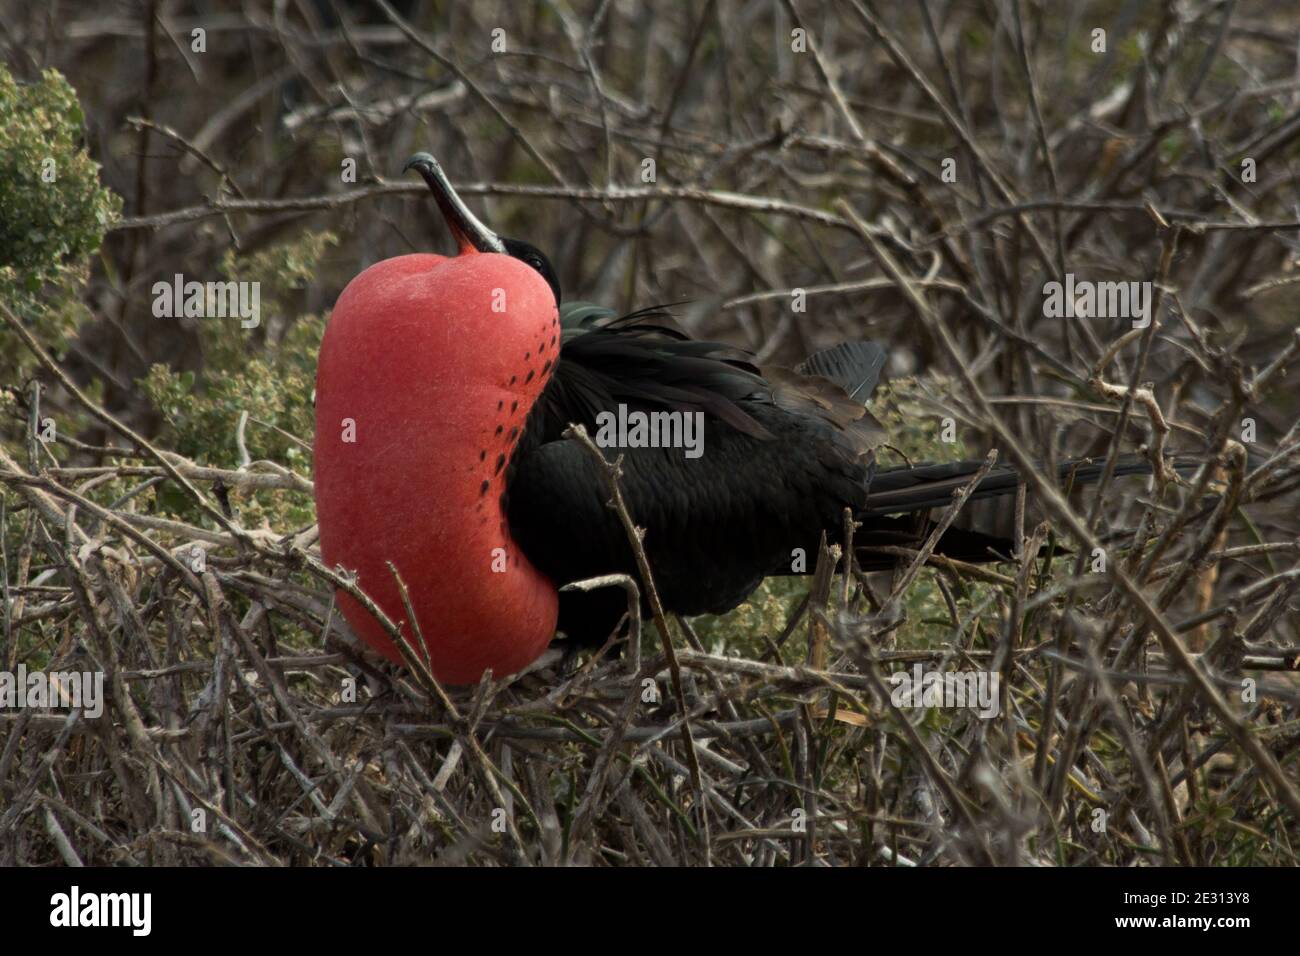 male magnificent frigatebird with inflated gular sac sitting on some shrub at North Seymour Island in the Galapagos Archipelago. Stock Photo